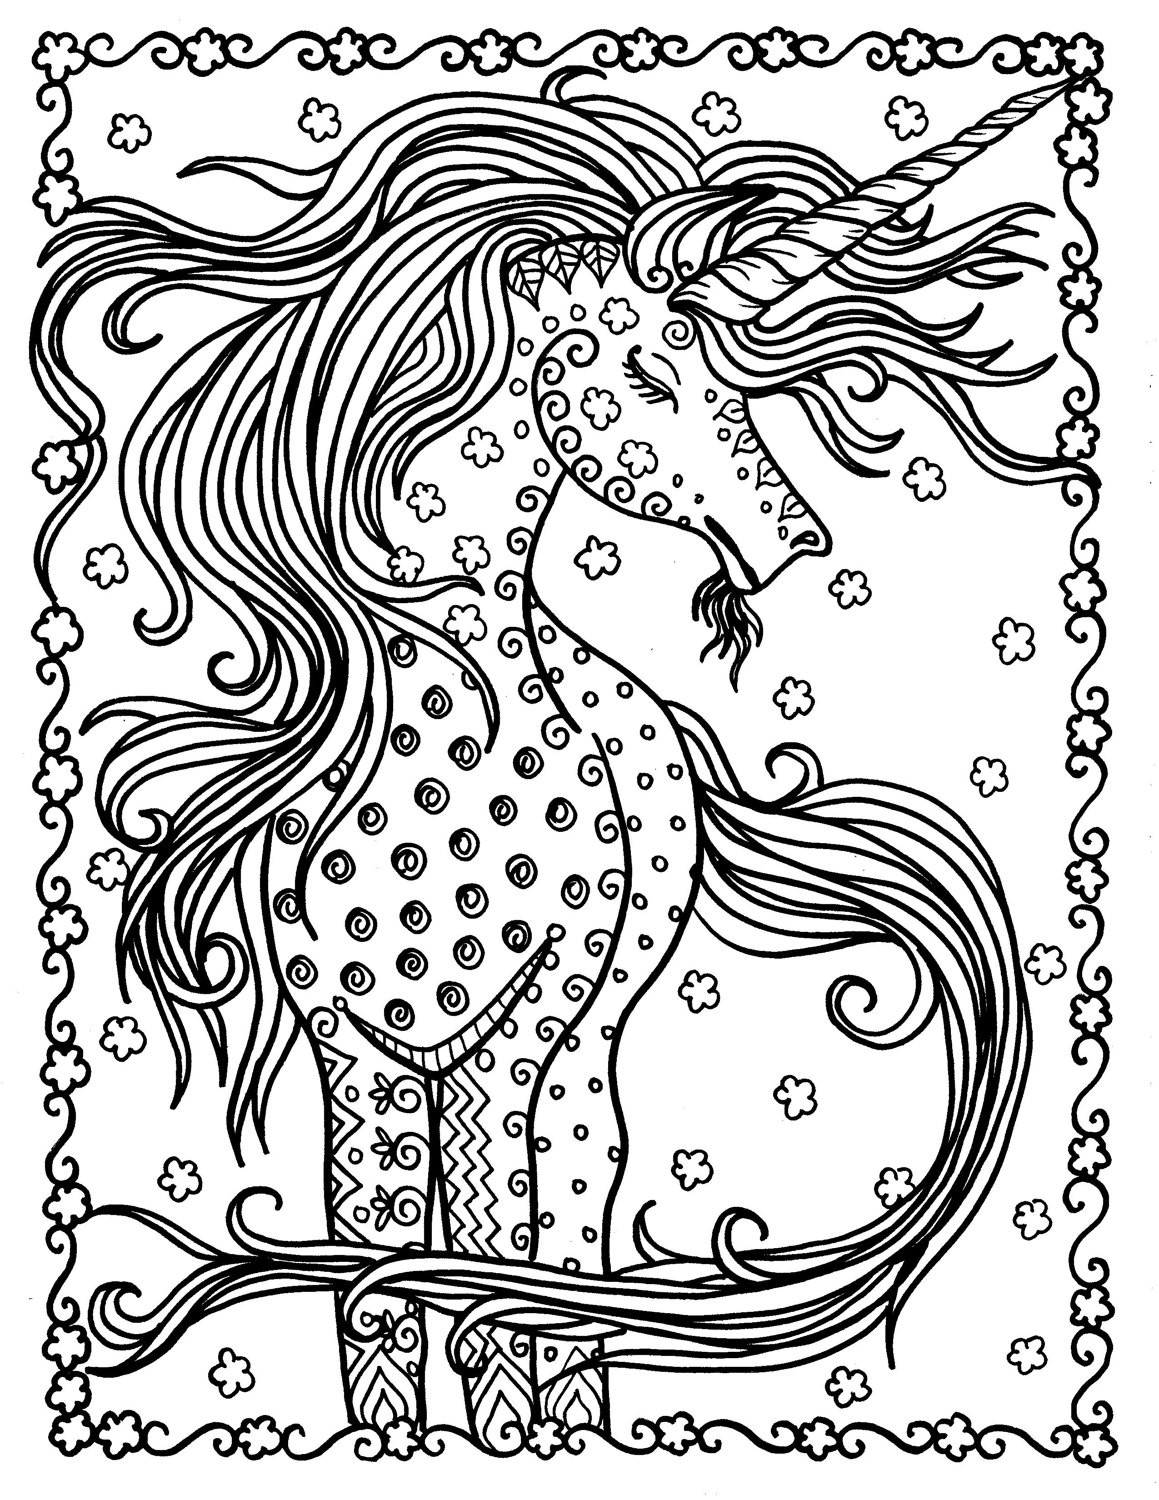 Free Unicorn Coloring Pages For Adults
 Unicorn Instant Download Fantasy Coloring Pages Adult